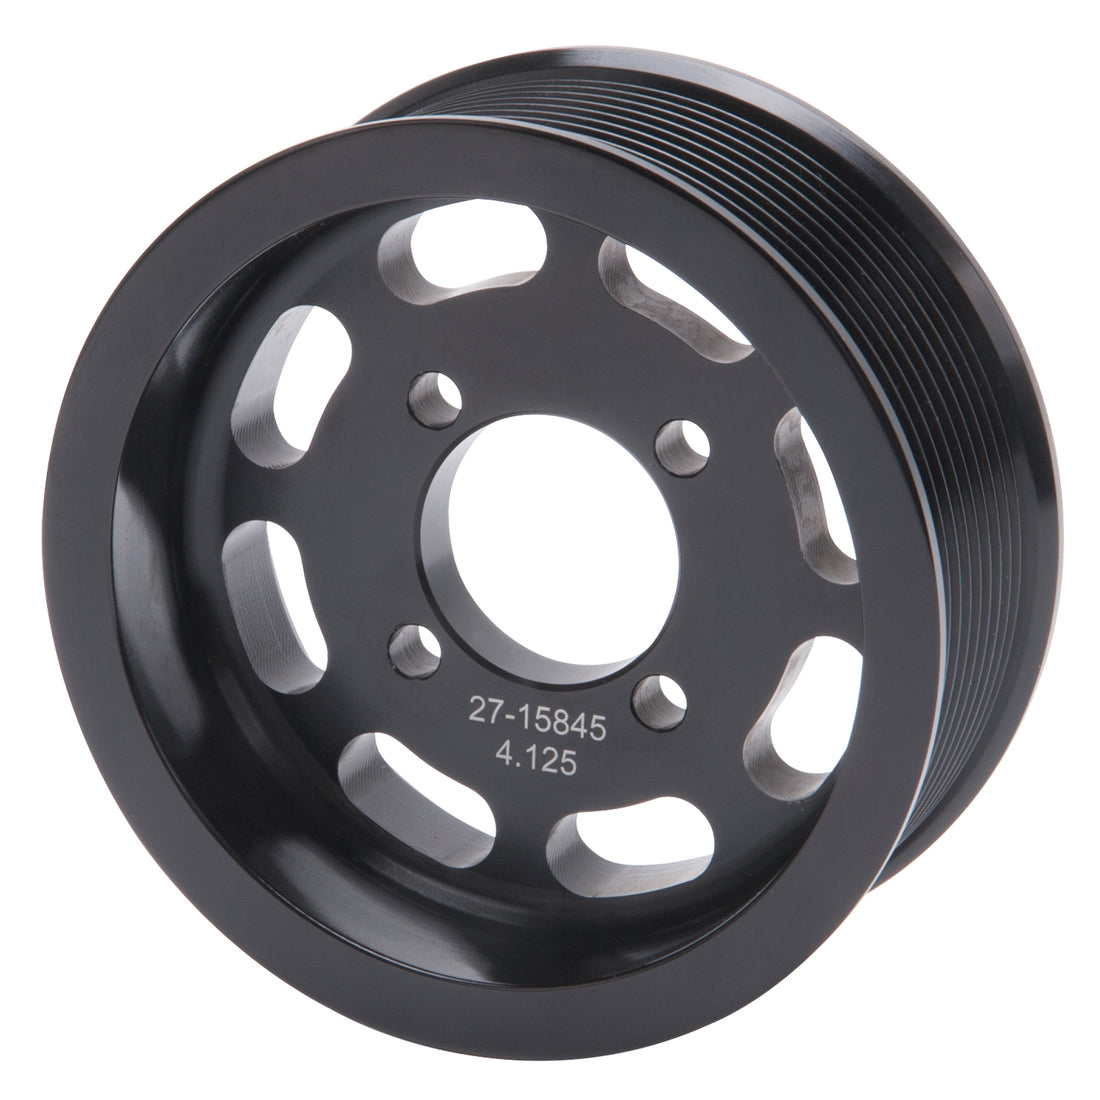 Edelbrock Competition Supercharger Pulley #15845 4.125 in. 10-Rib Black Anodized Edelbrock